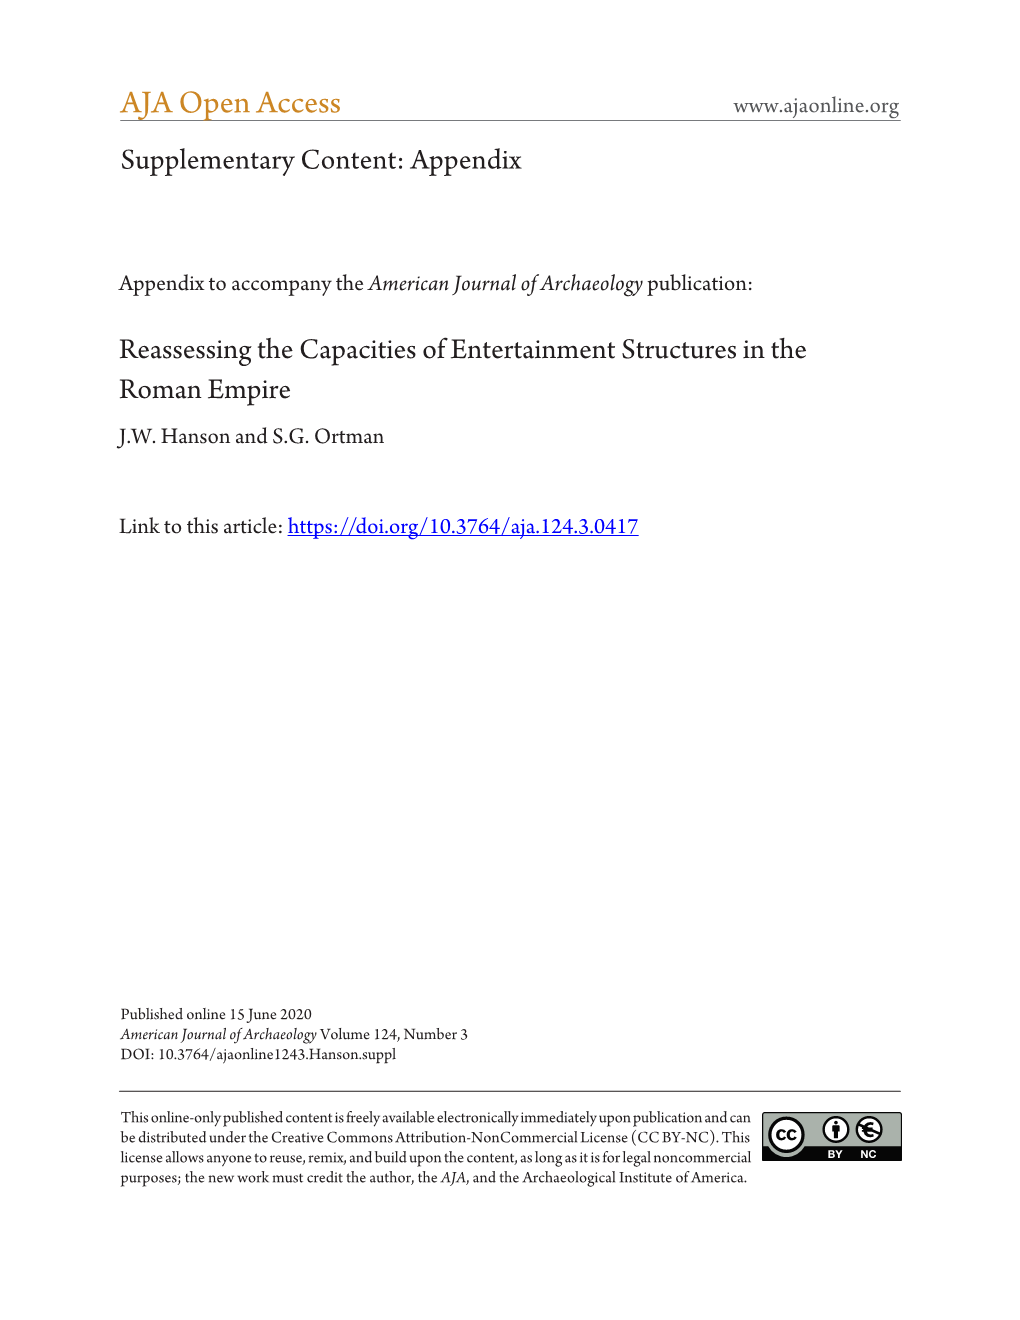 Online Supplementary Content: Reassessing the Capacities Of